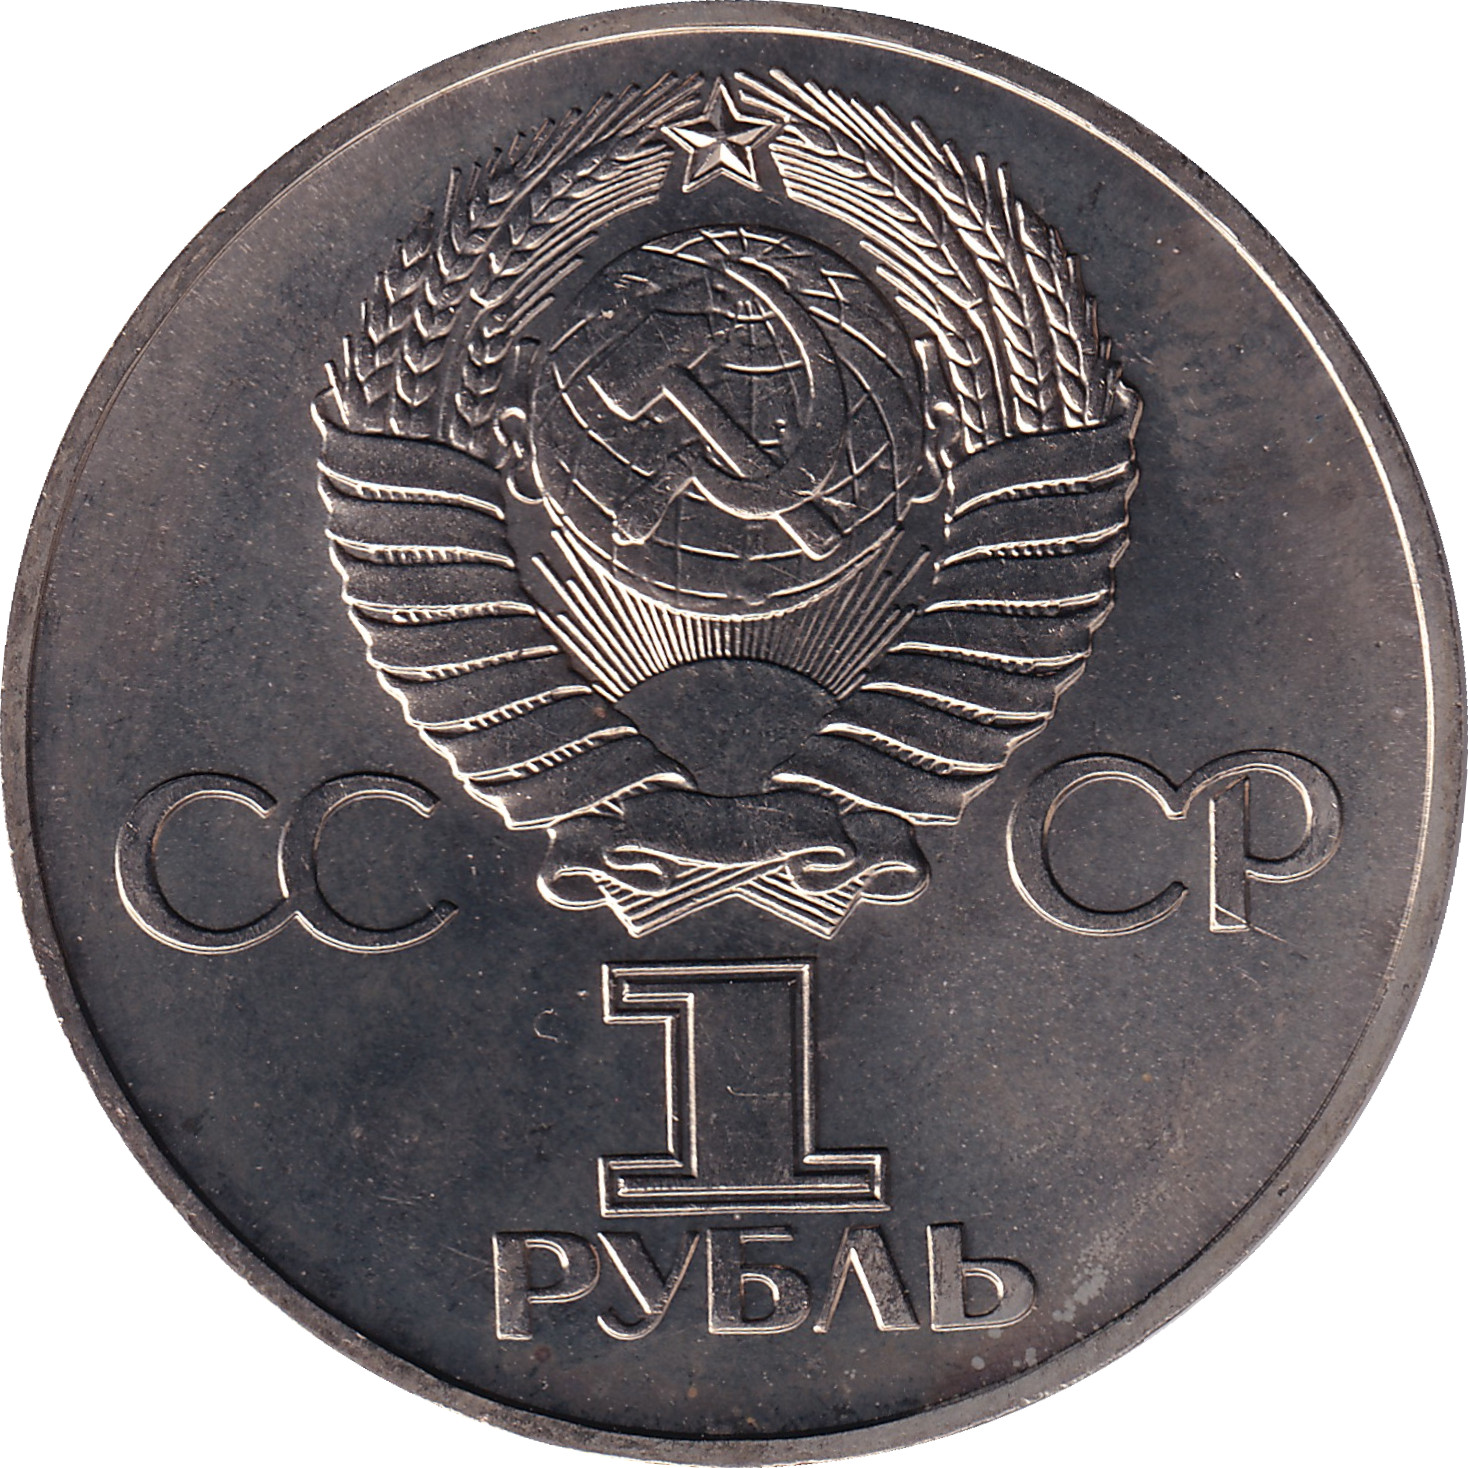 1 ruble - Victoire - 30 years